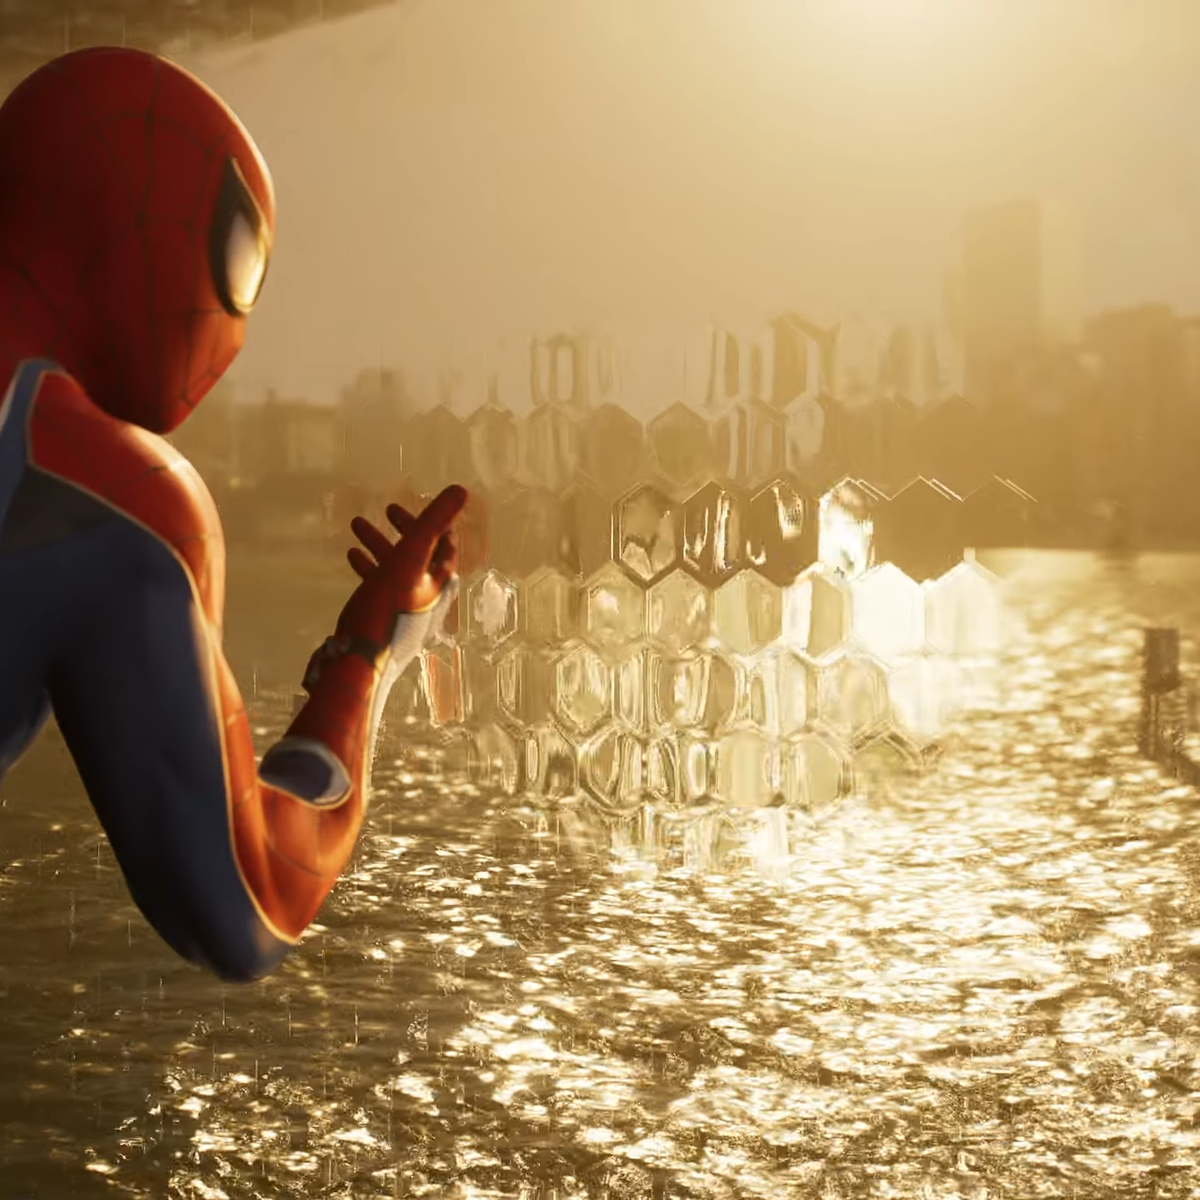 Marvel's Spider-Man 2 will have very little downtime when fast travelling